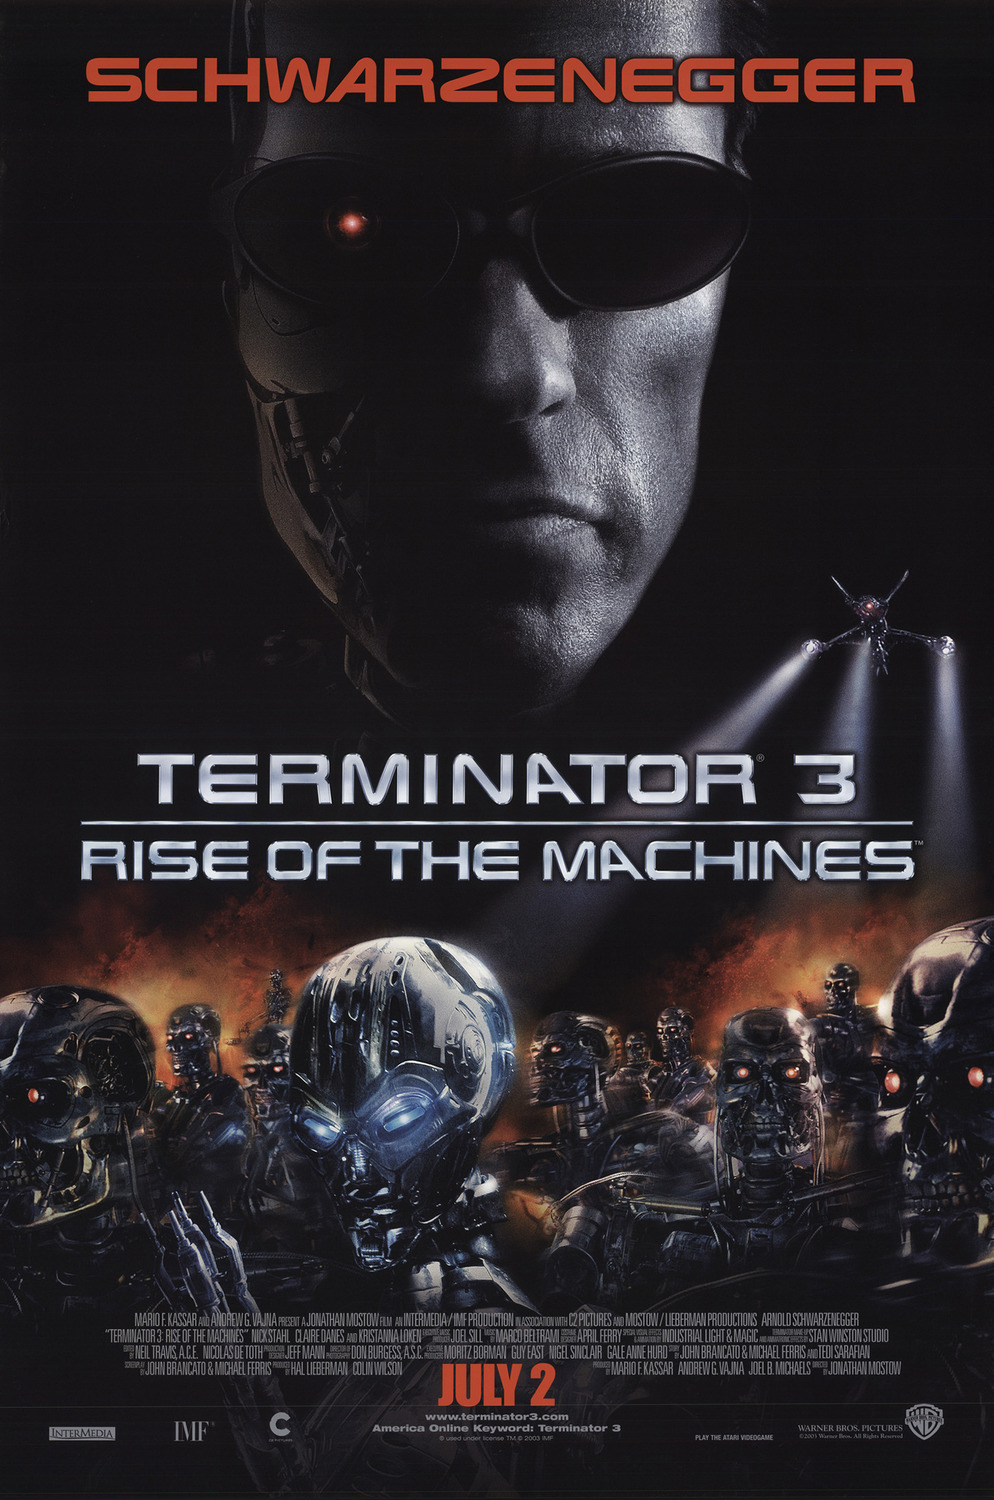 Terminator-3-Rise-Of-The-Machines-Posters-004.jpg